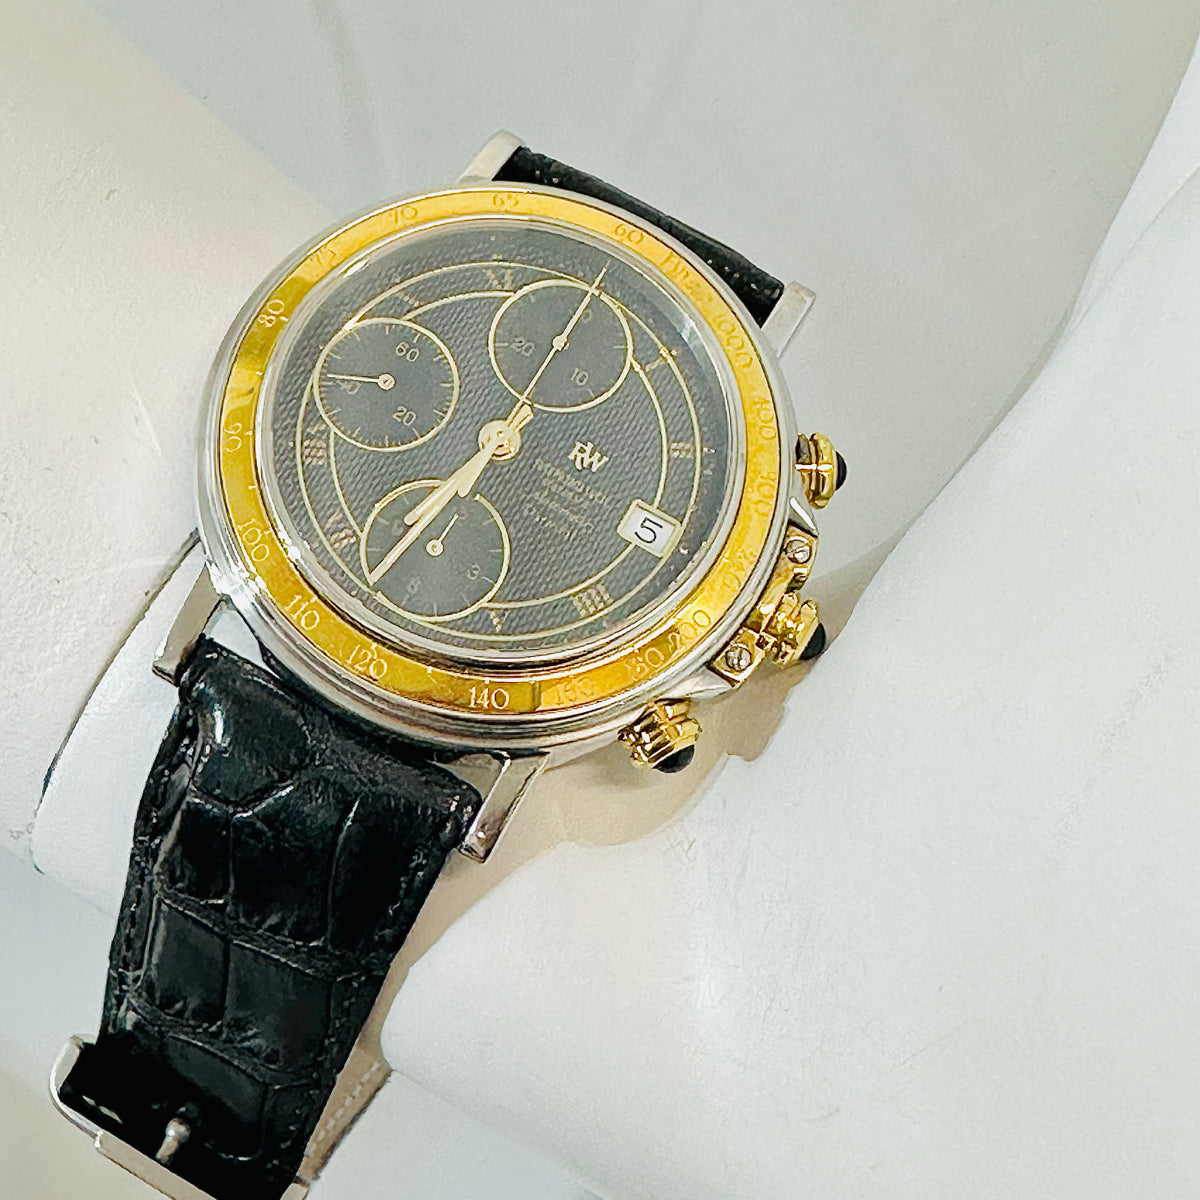 Raymond Weil 18K Gold Stainless Steel Parsifal Chronograph Watch